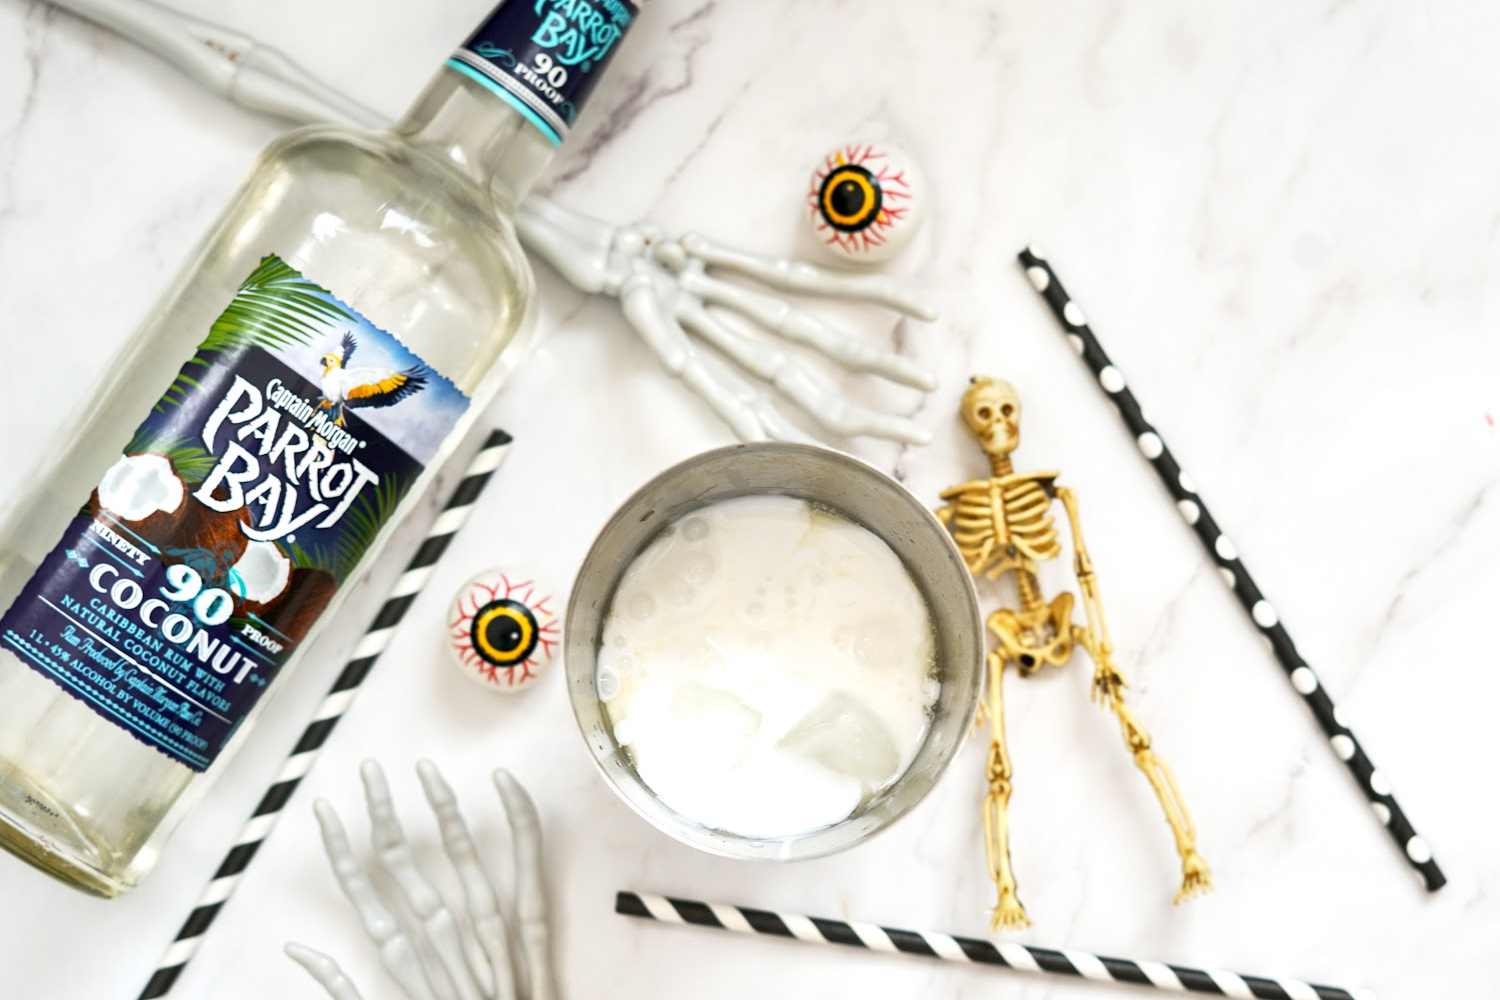 Laying flat on a white marble back ground are the Halloween pina colada mix in a shaker and the bottle of rum. Eyeballs and mini skeletons make this feel a little spooky.